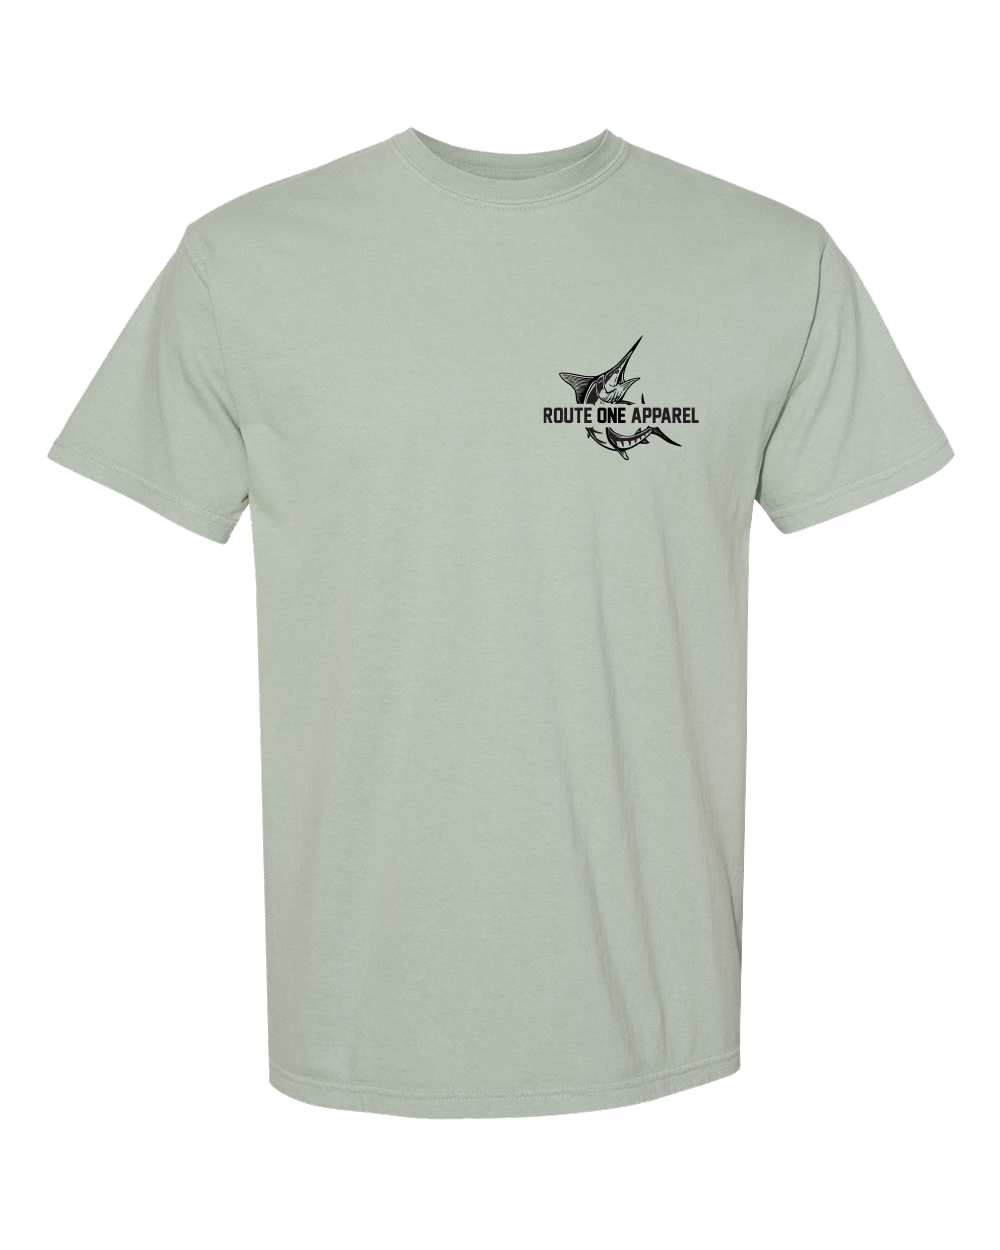 *PRE-ORDER* Hooked on Maryland White Marlin (Bay Green) / Shirt - Route One Apparel